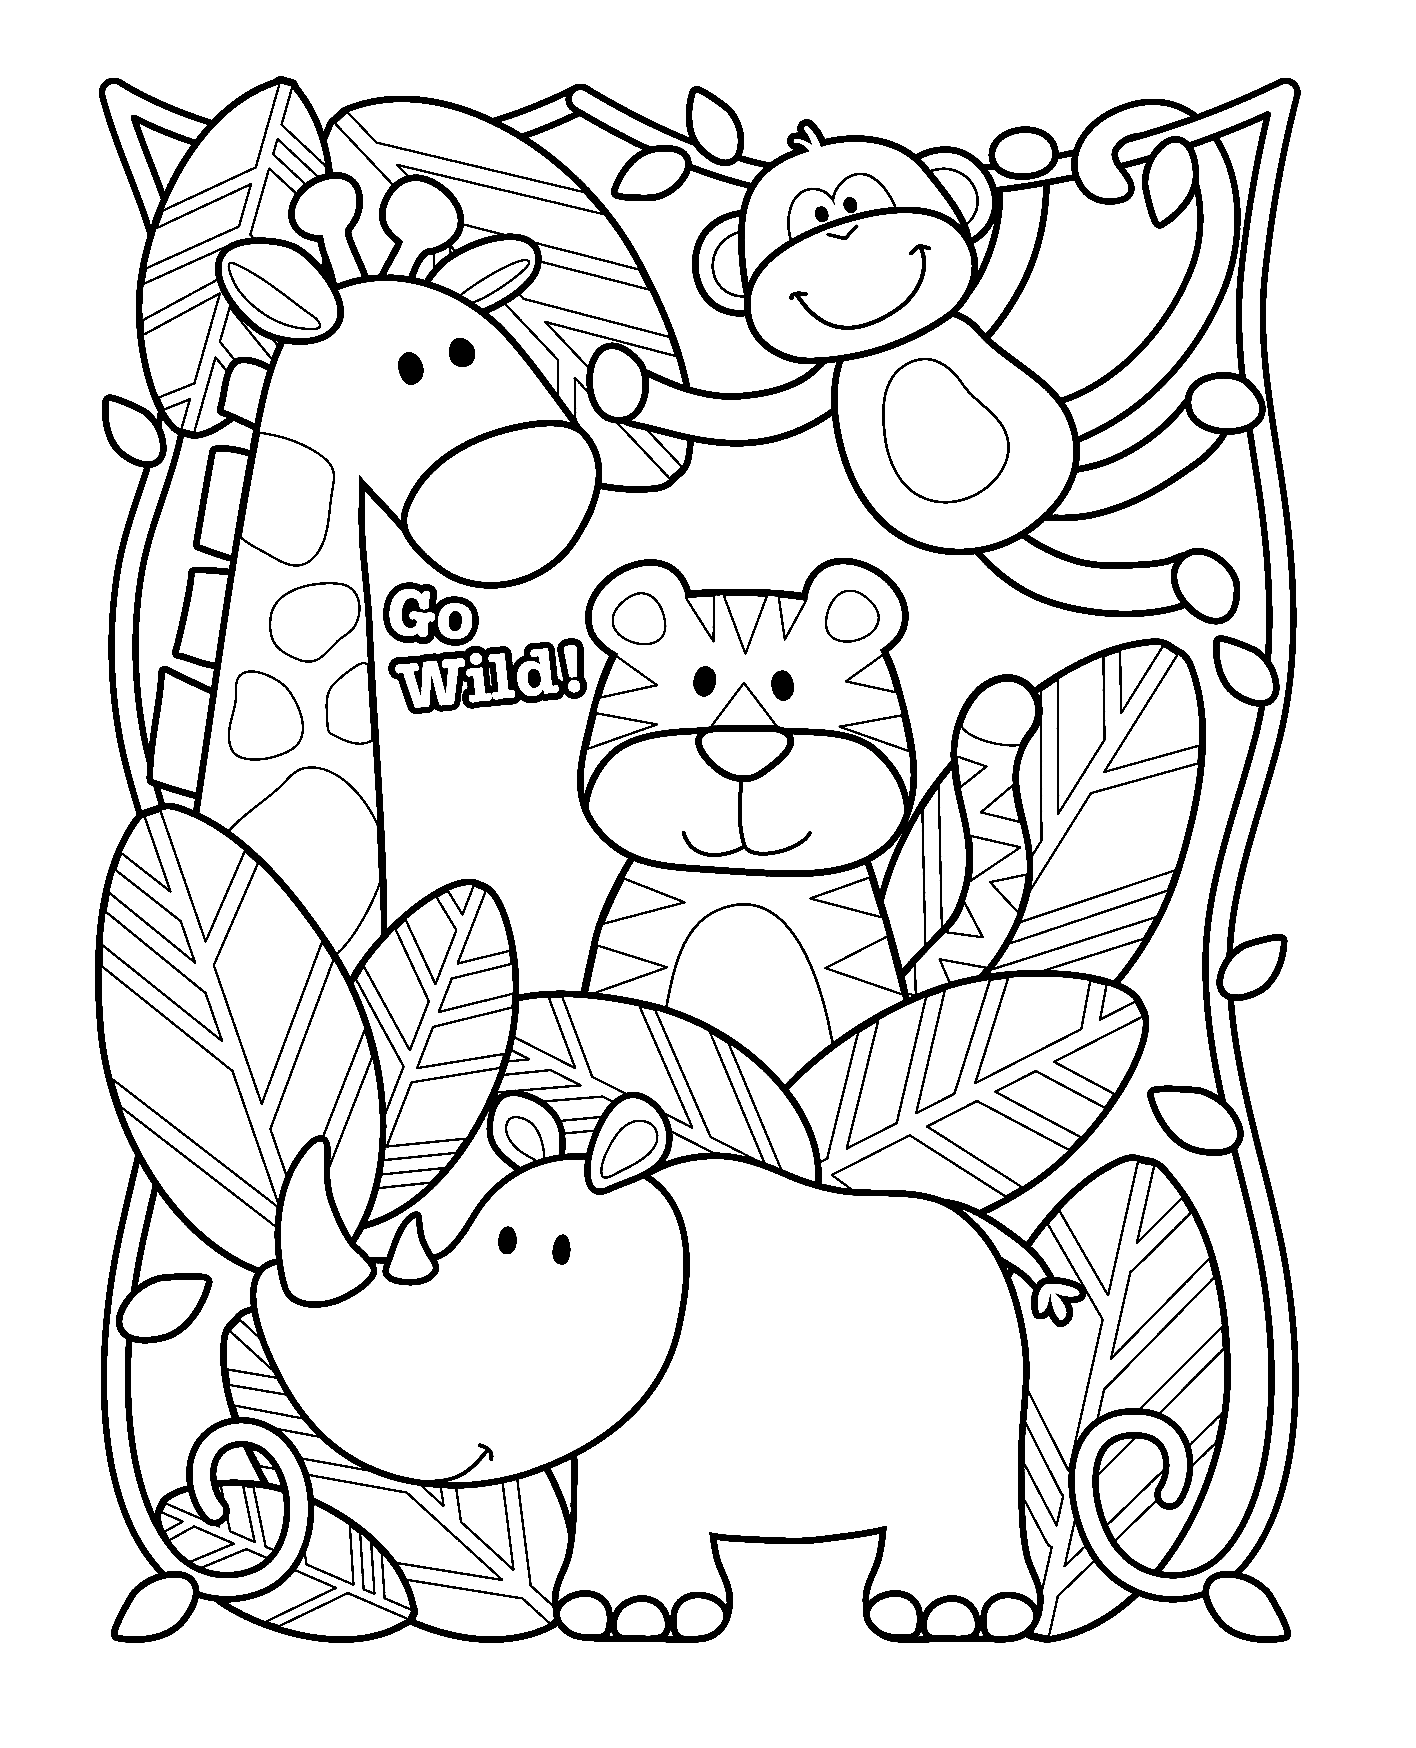 zoo-coloring-pages-bring-the-zoo-to-your-children-s-house-coloring-article-coloring-articles